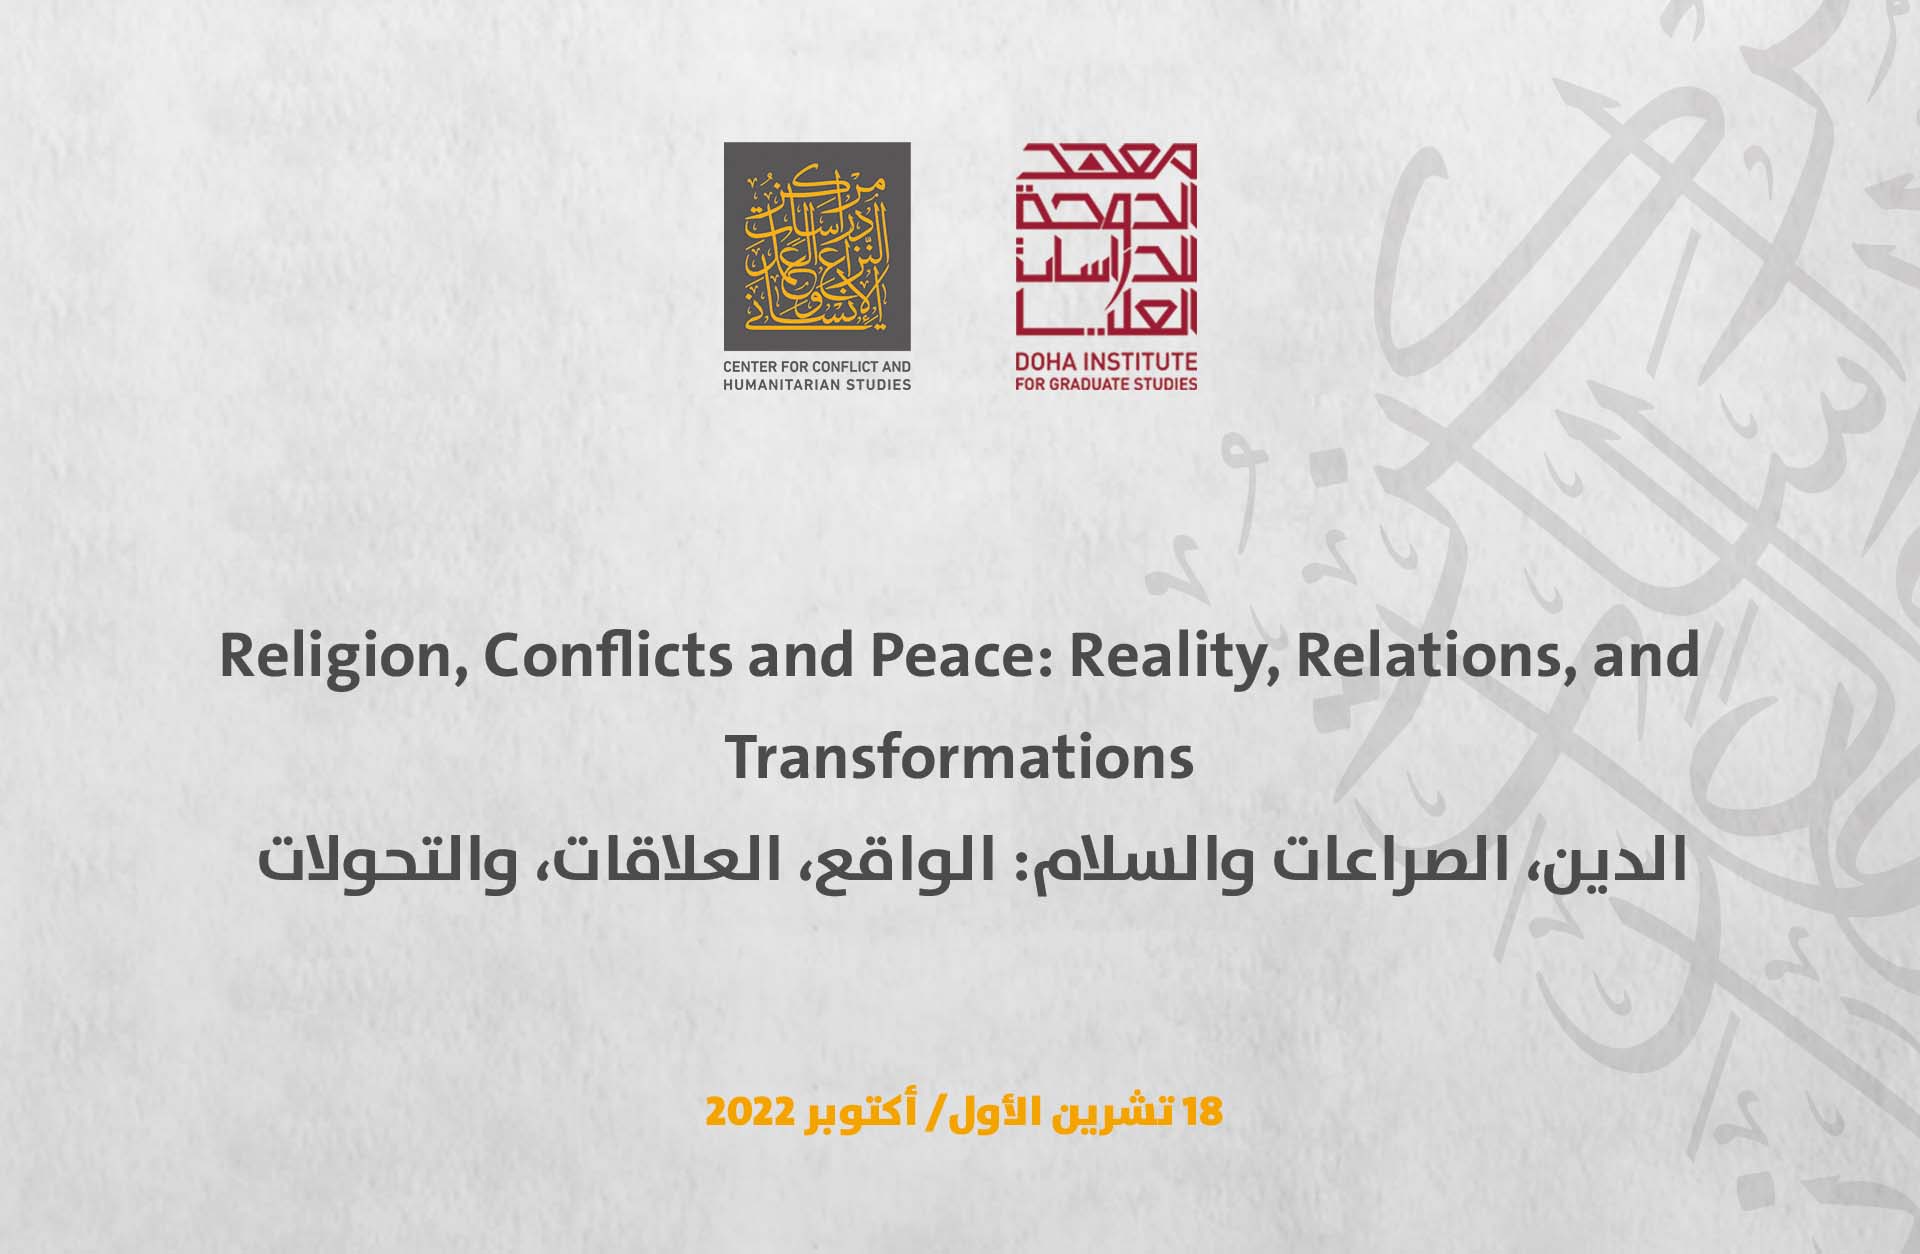 Religion, Conflicts and Peace: Reality, Relations, and Transformations